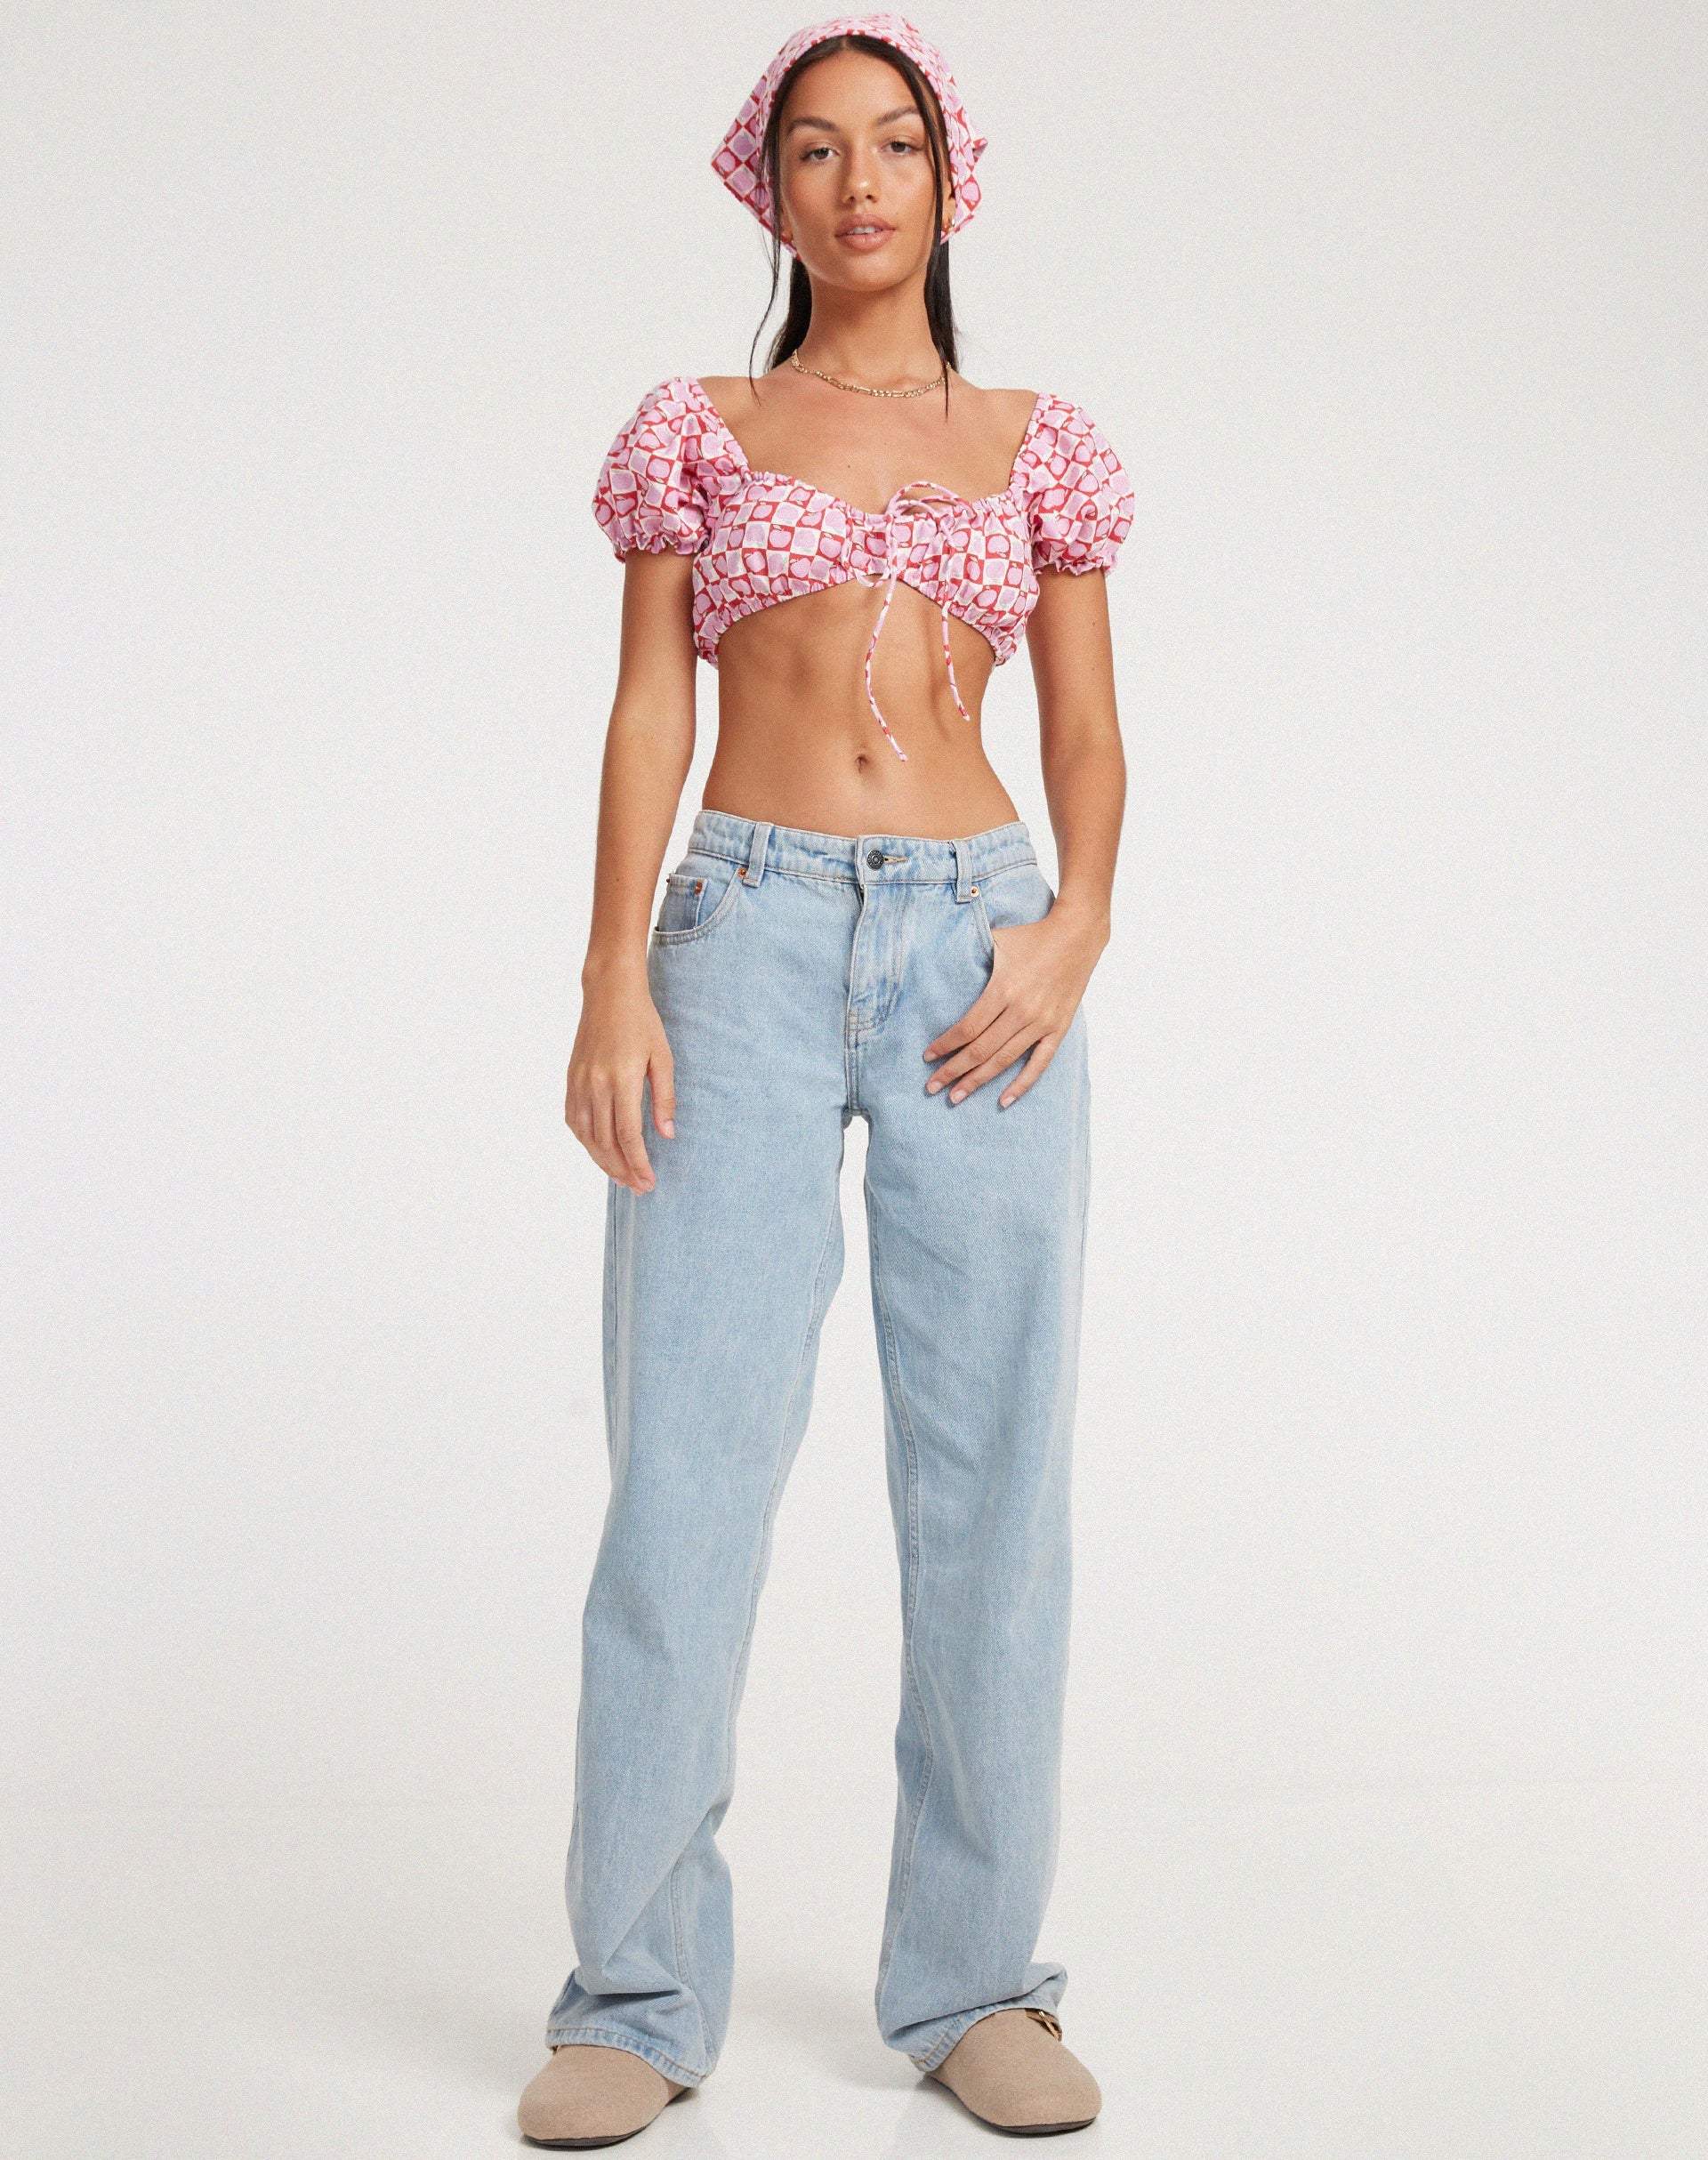 image of Haenji Crop Top in Apple Check Blush Red